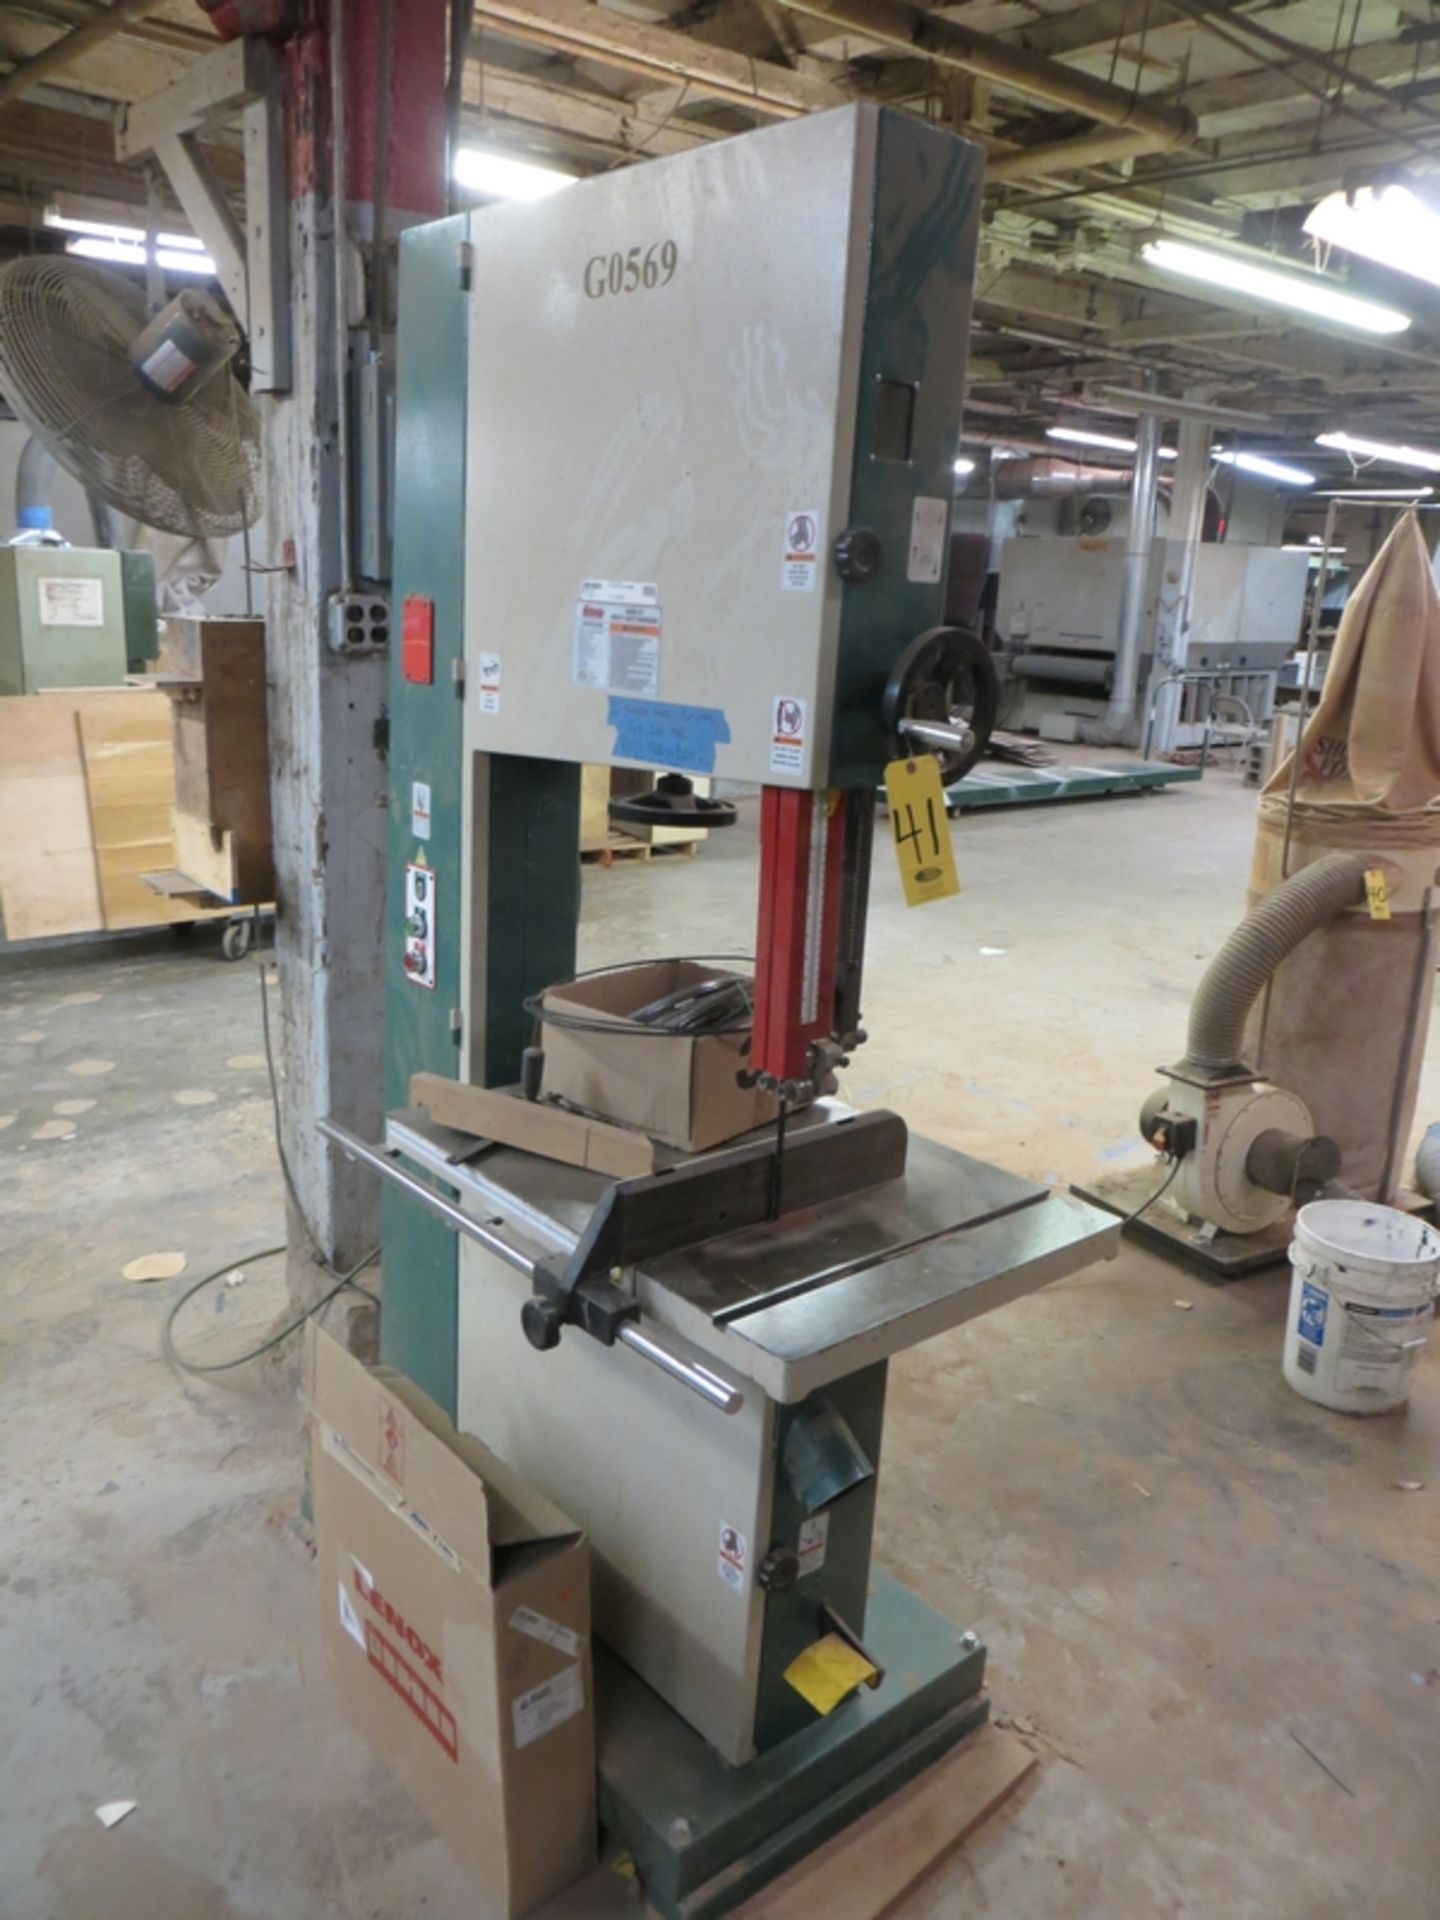 2007 GRIZZLY GO569 24" HD BAND SAW, 33-1/2 X 23-5/8 TABLE